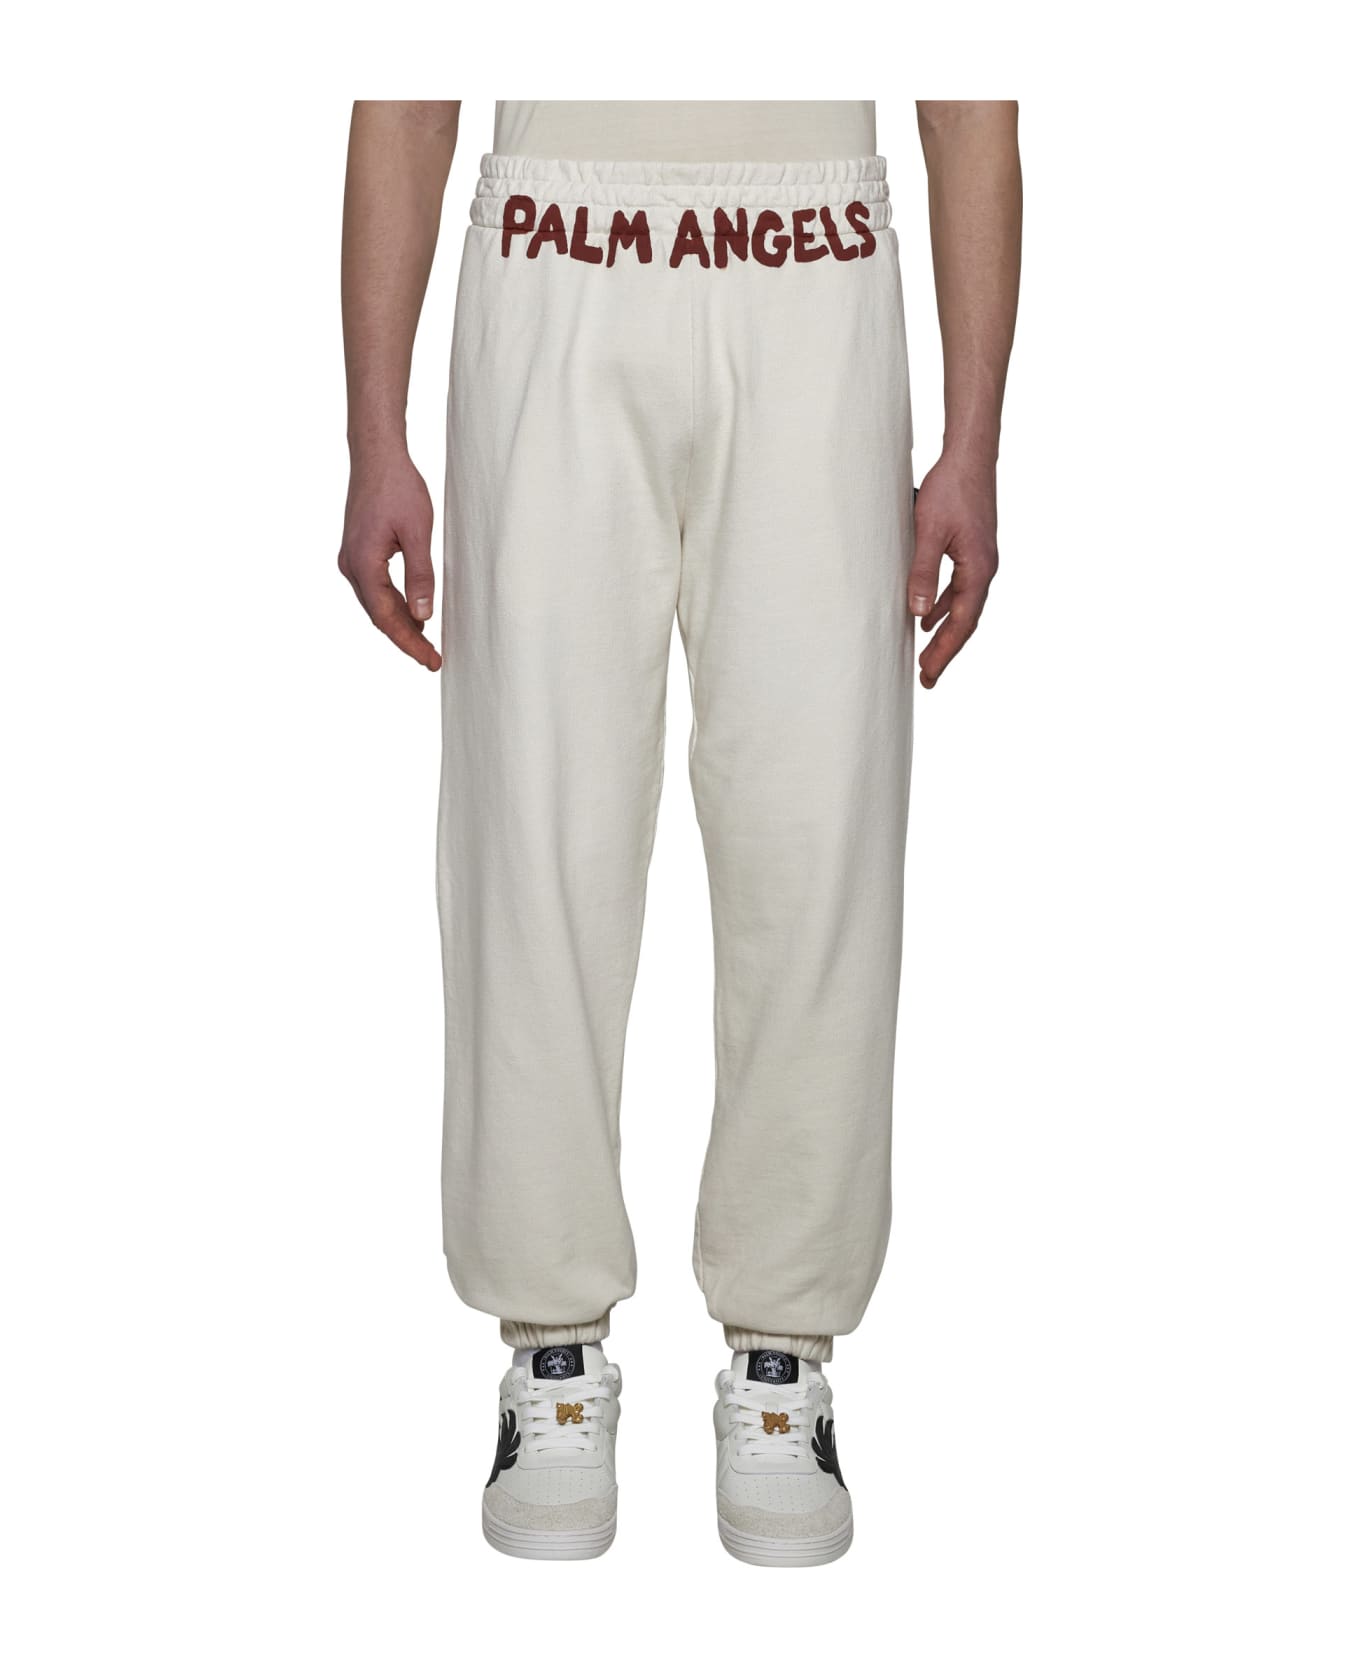 Palm Angels Pants - Off white red